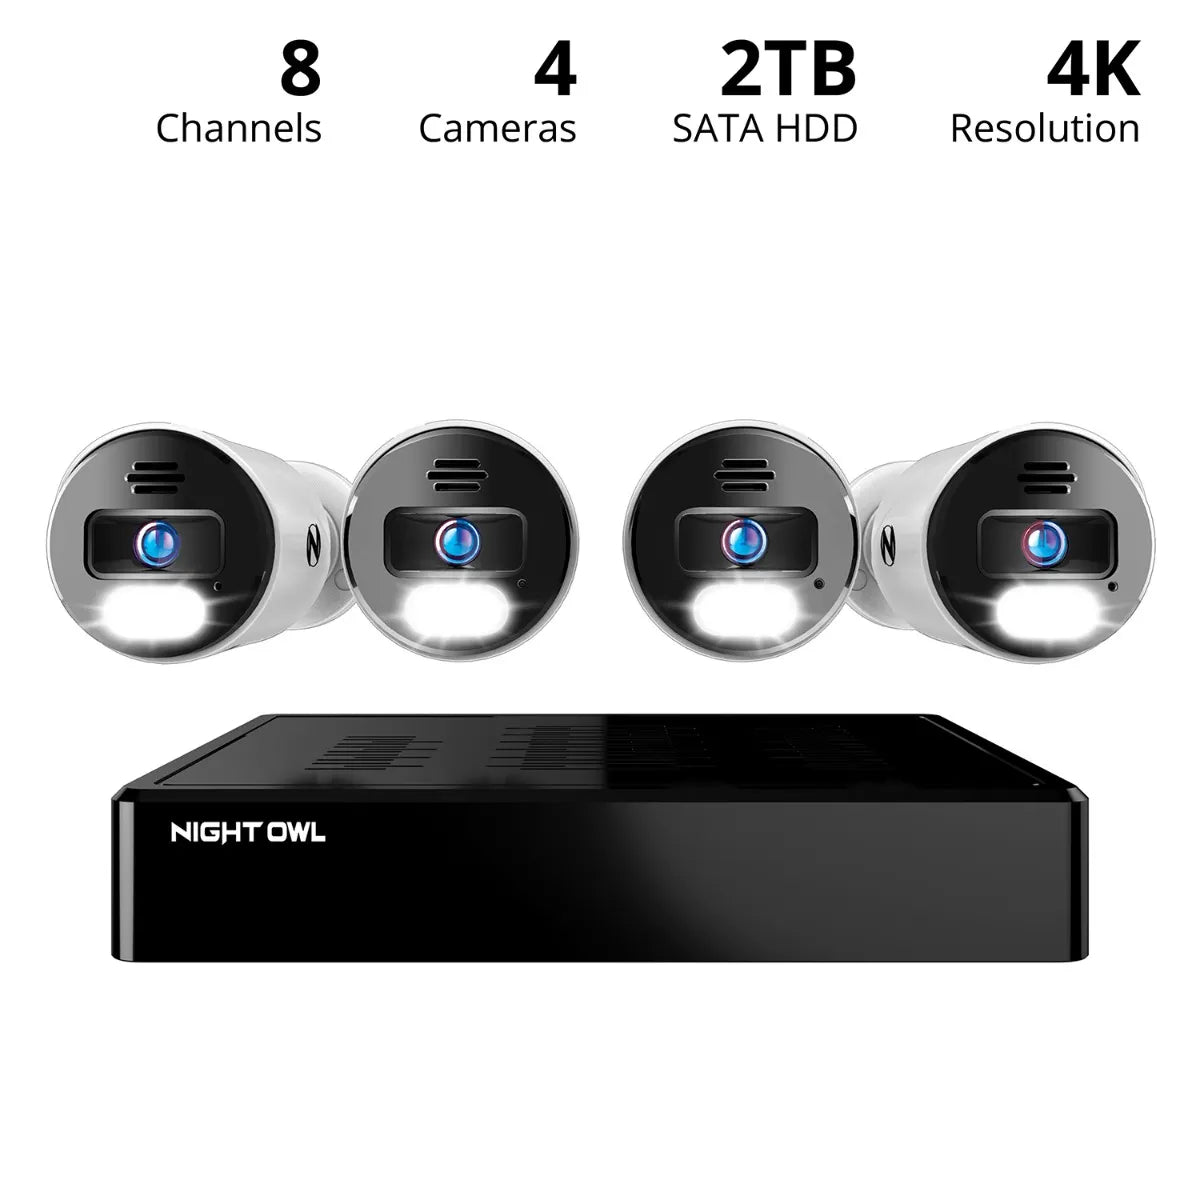 NVR Security System with Cameras